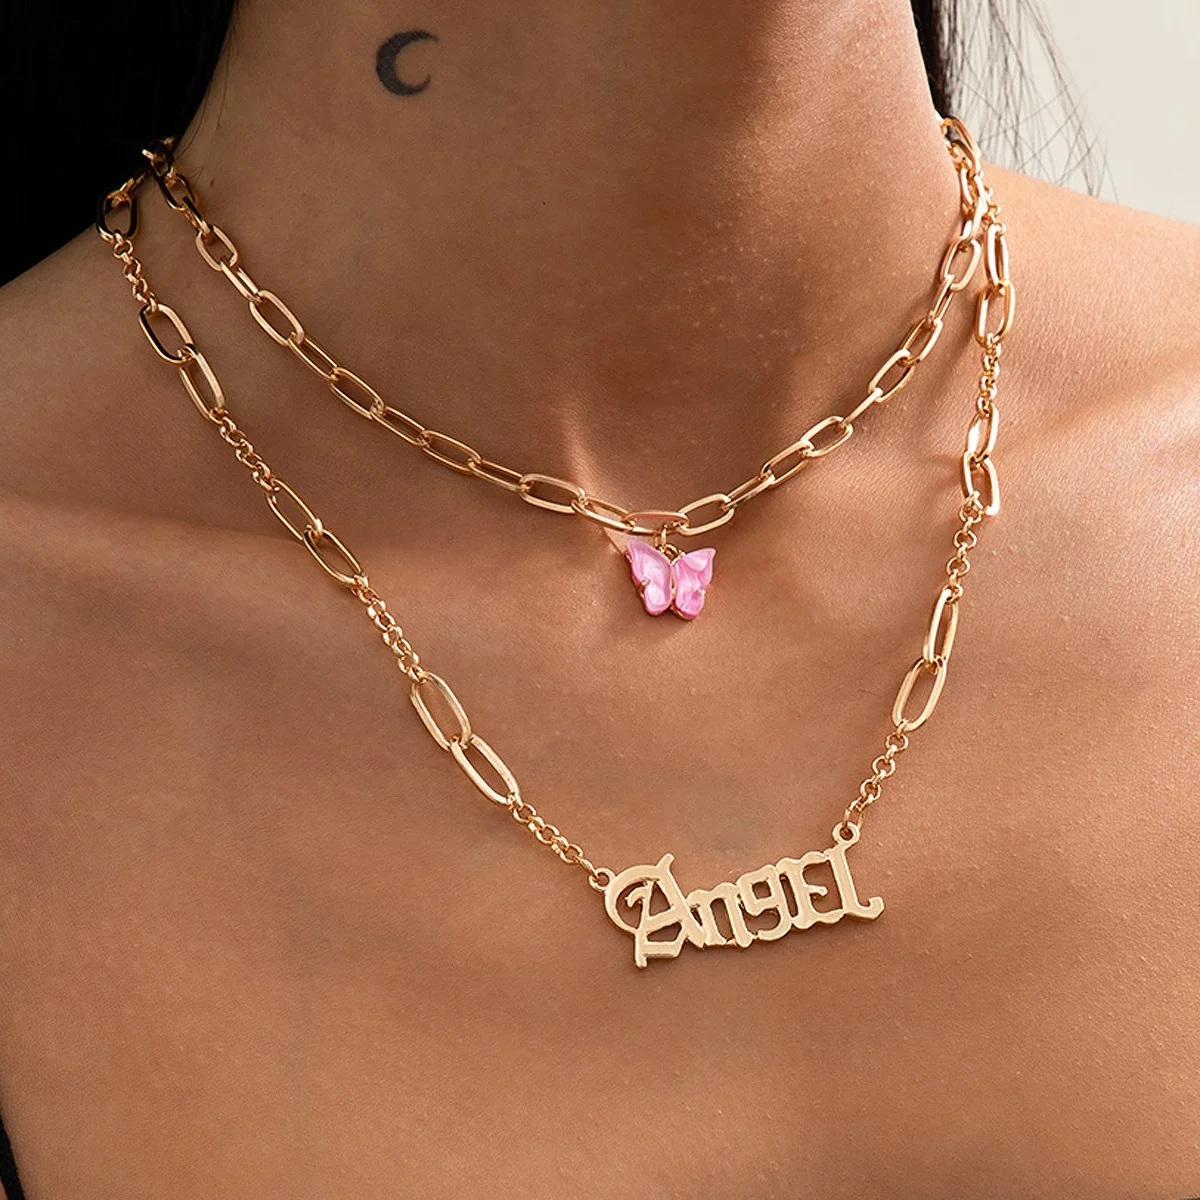 

Exaggerated Layered Necklace Female Butterfly Choker Women Statement Necklace Double Layer Letter Necklace Jewelry, Picture shows